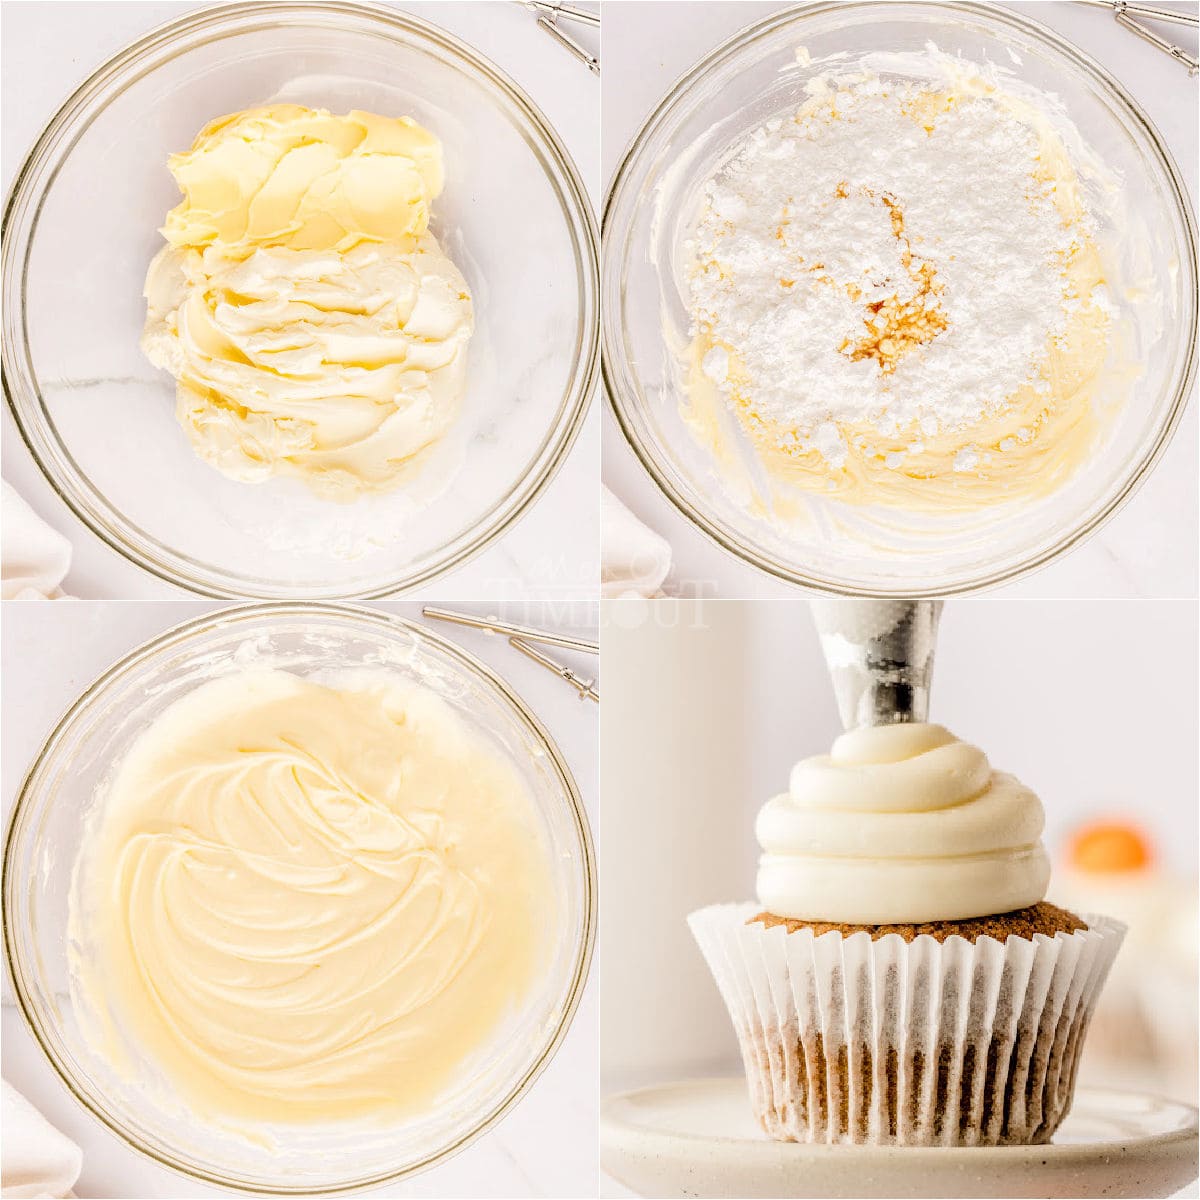 four image collage showing how to make cream cheese frosting and last image shows the frosting being piped onto the pumpkin cupcake.